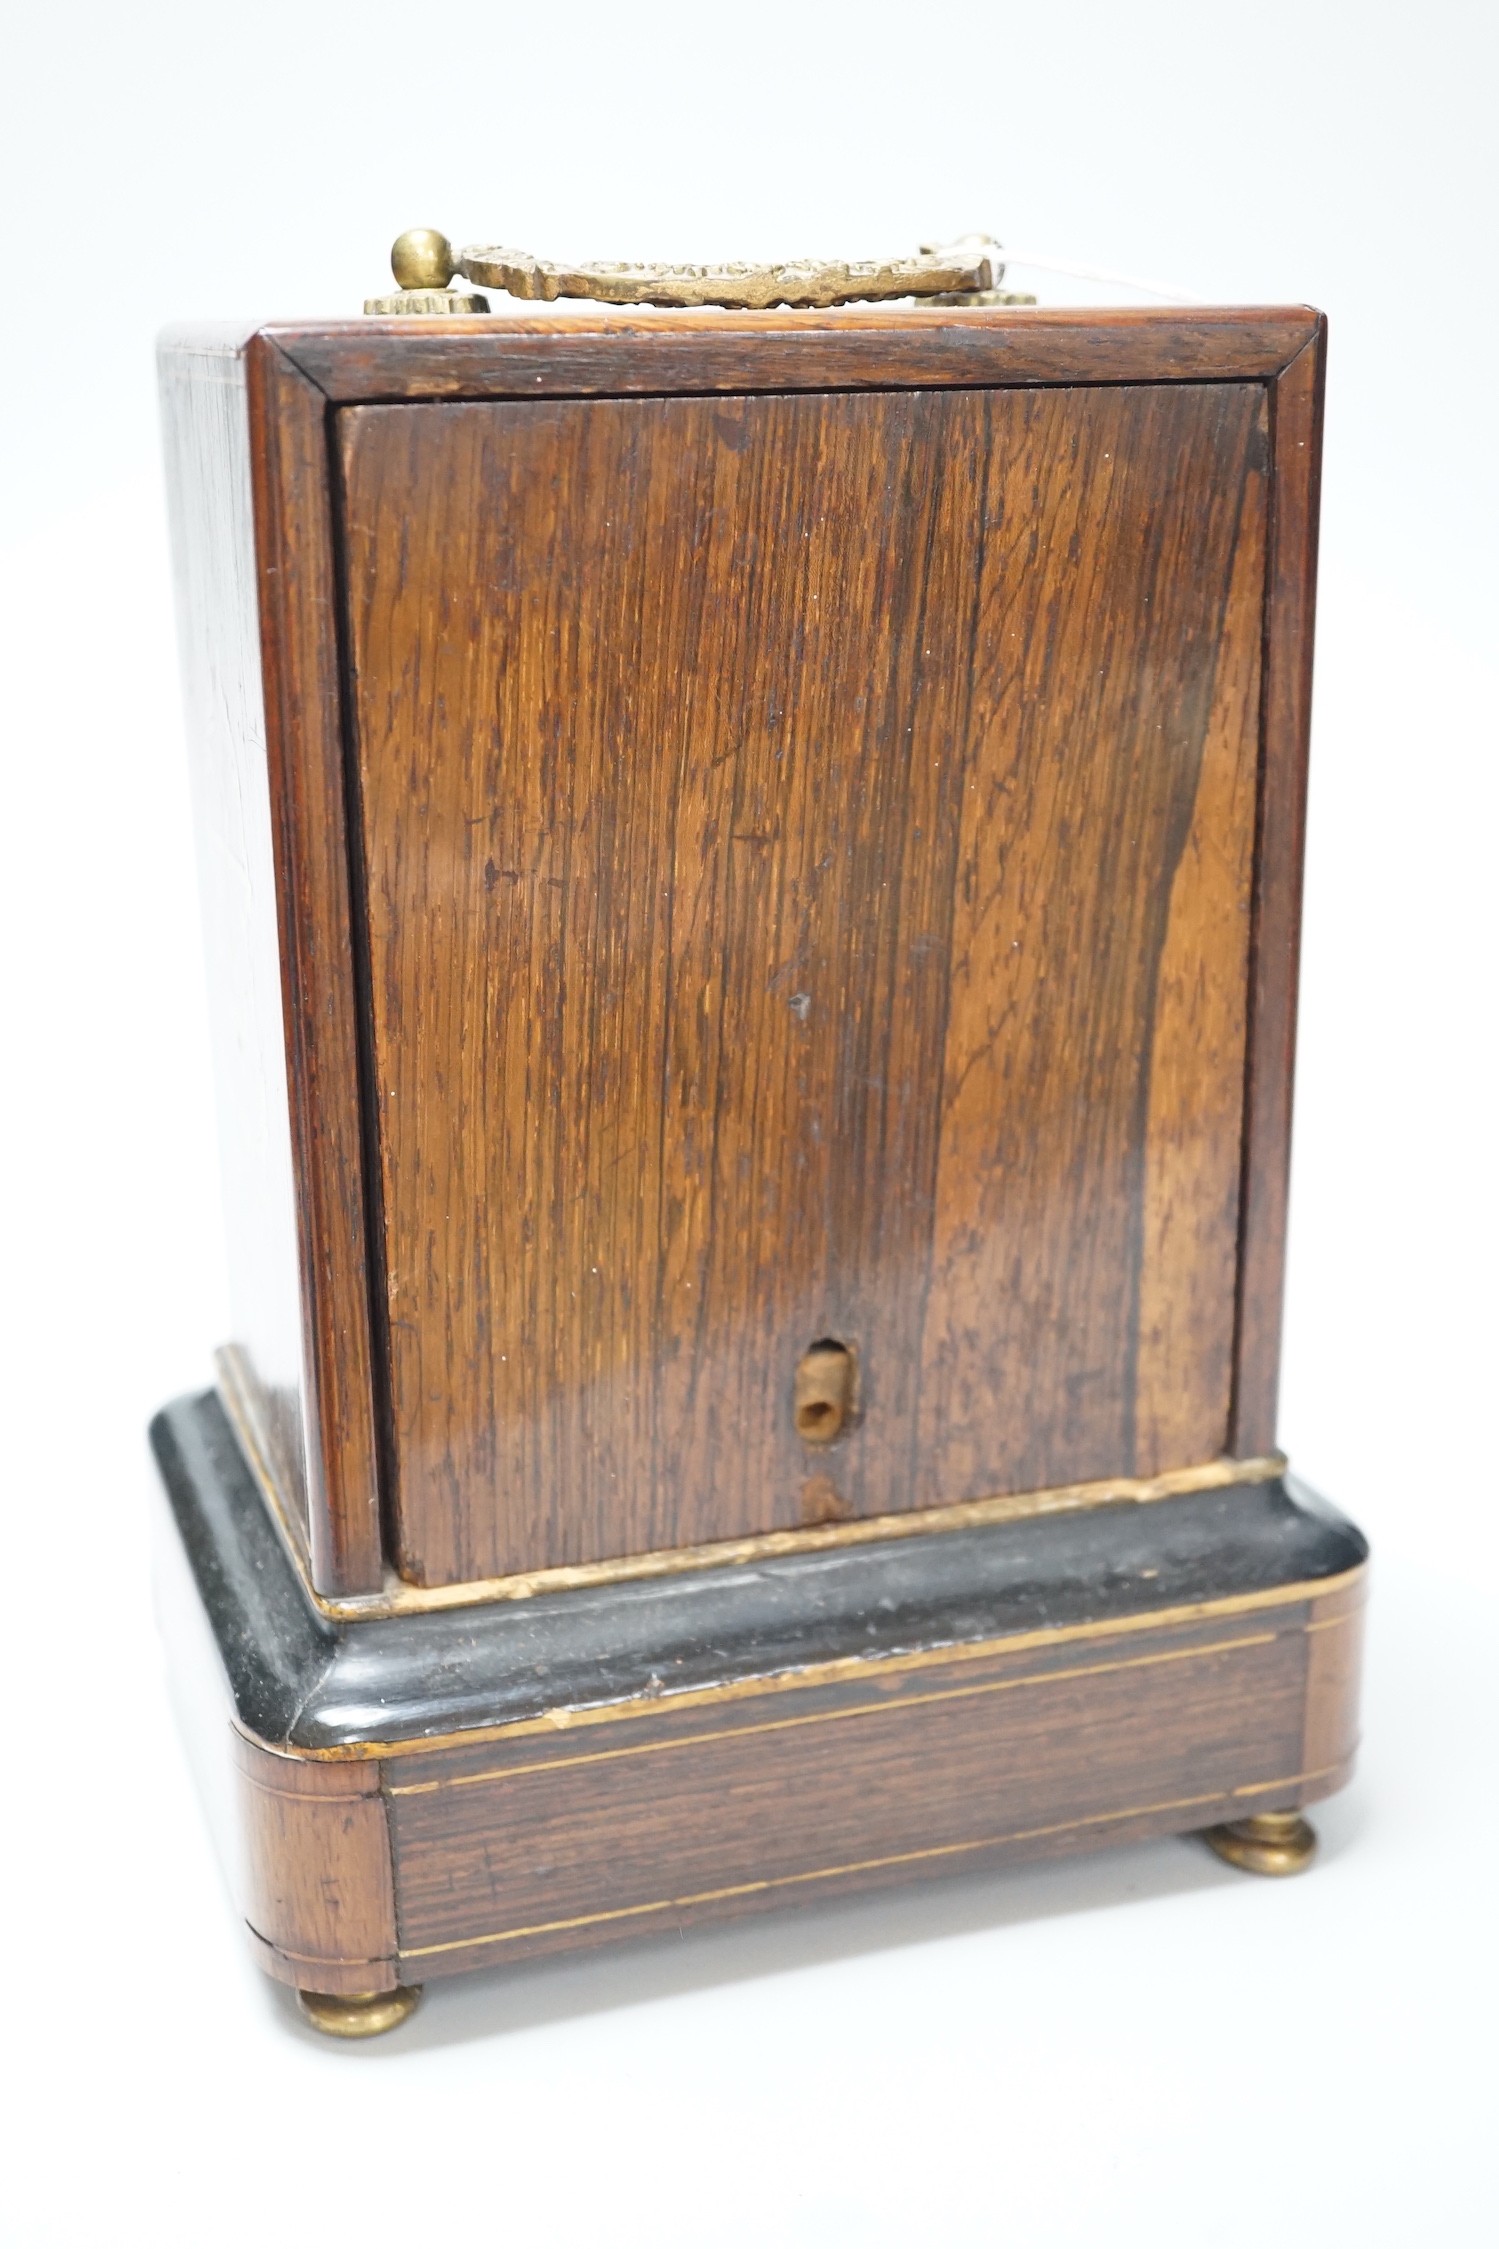 A 19th century French rosewood and marquetry mantel clock, 23cm